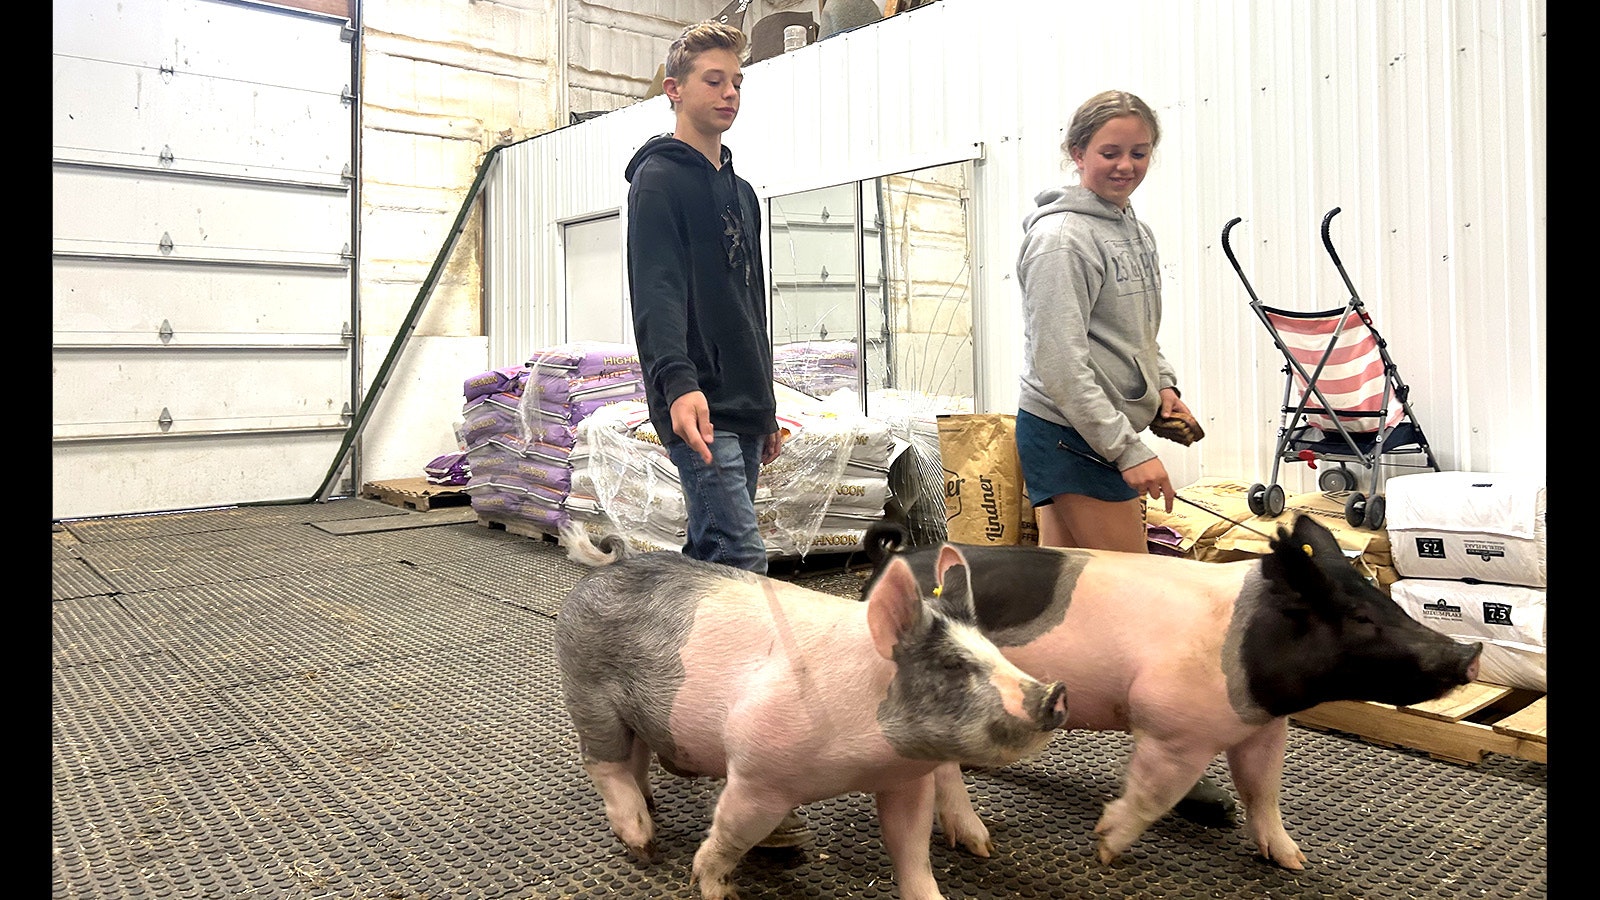 Shane and Daisy Rogers take their 4-H show pigs Big Blue and Petunia for a walk at the 4-H barn outside Pinedale in Sublette County.